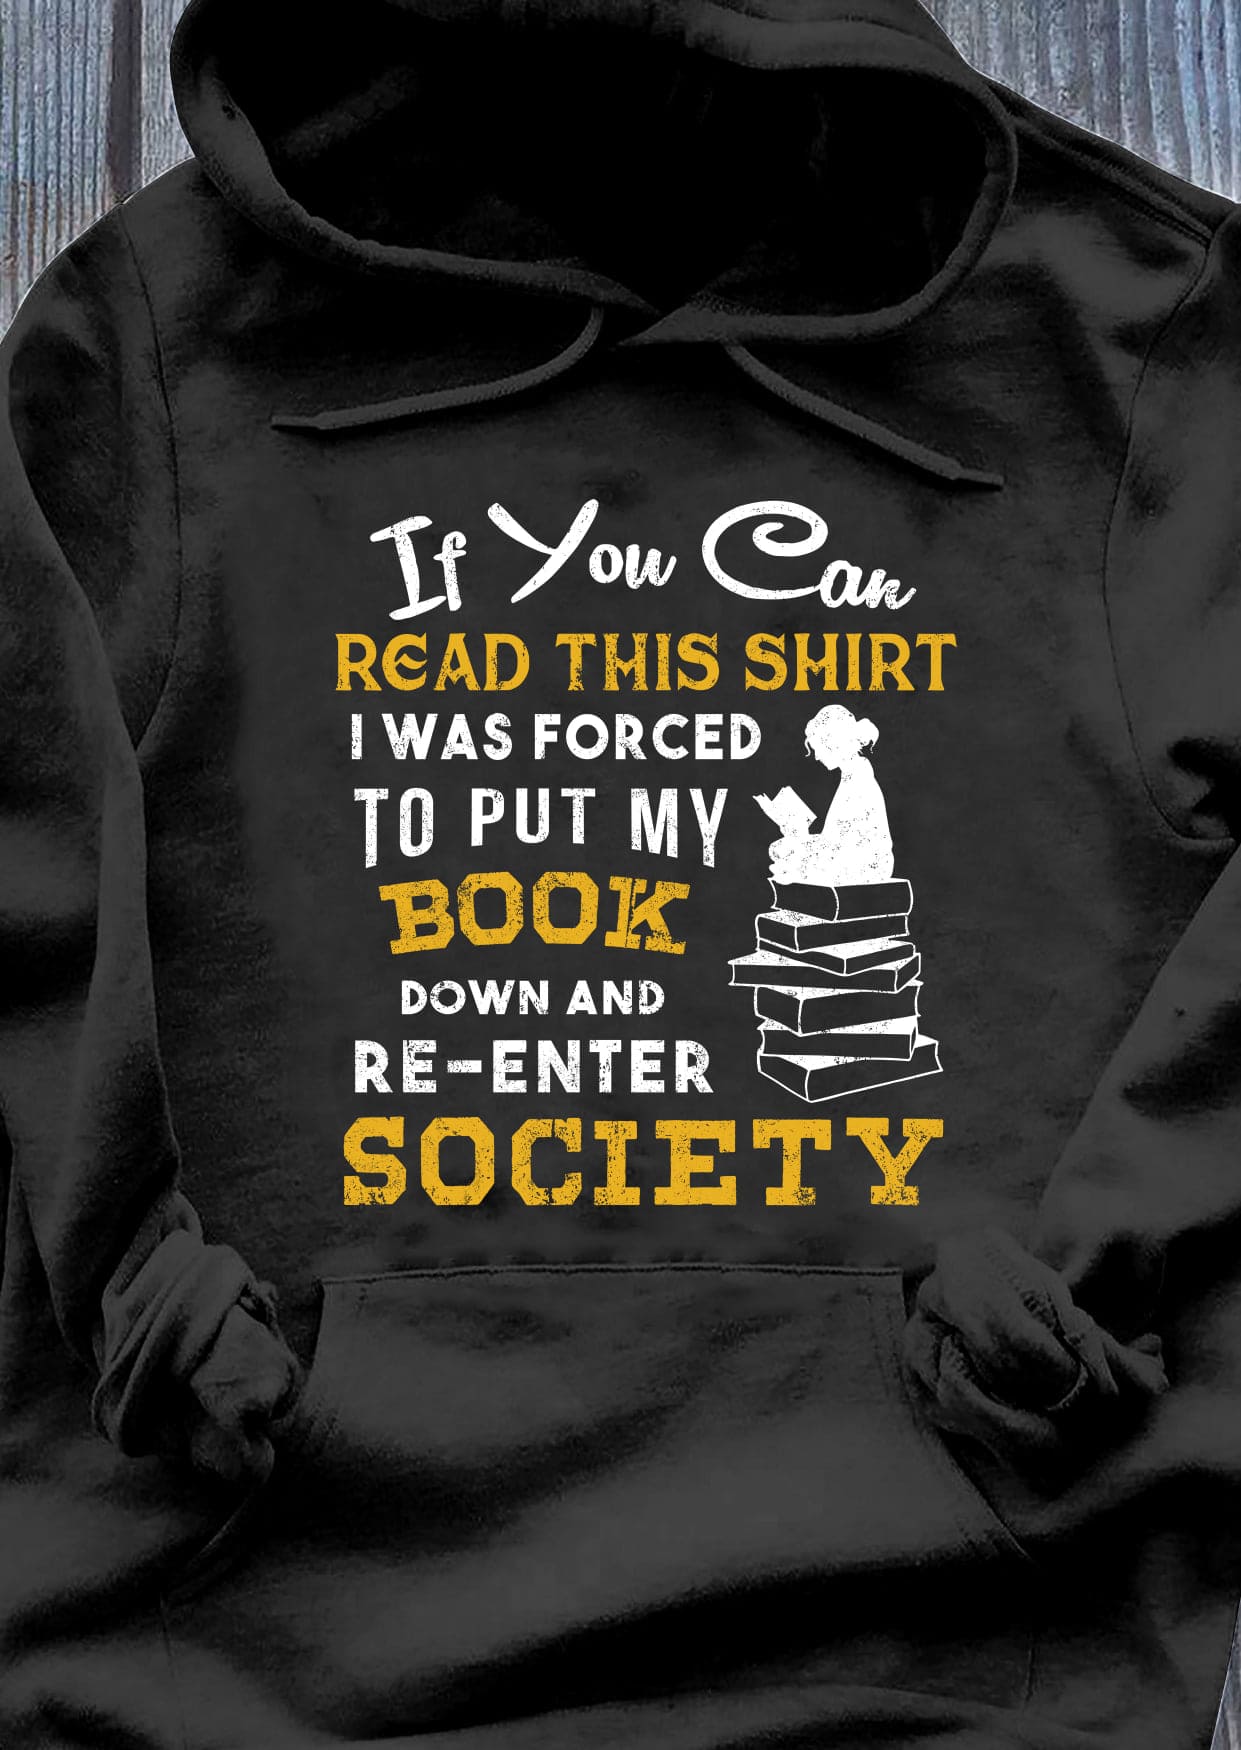 If you can read this shirt I was forced to put my book down and re-enter society - Girl reading books